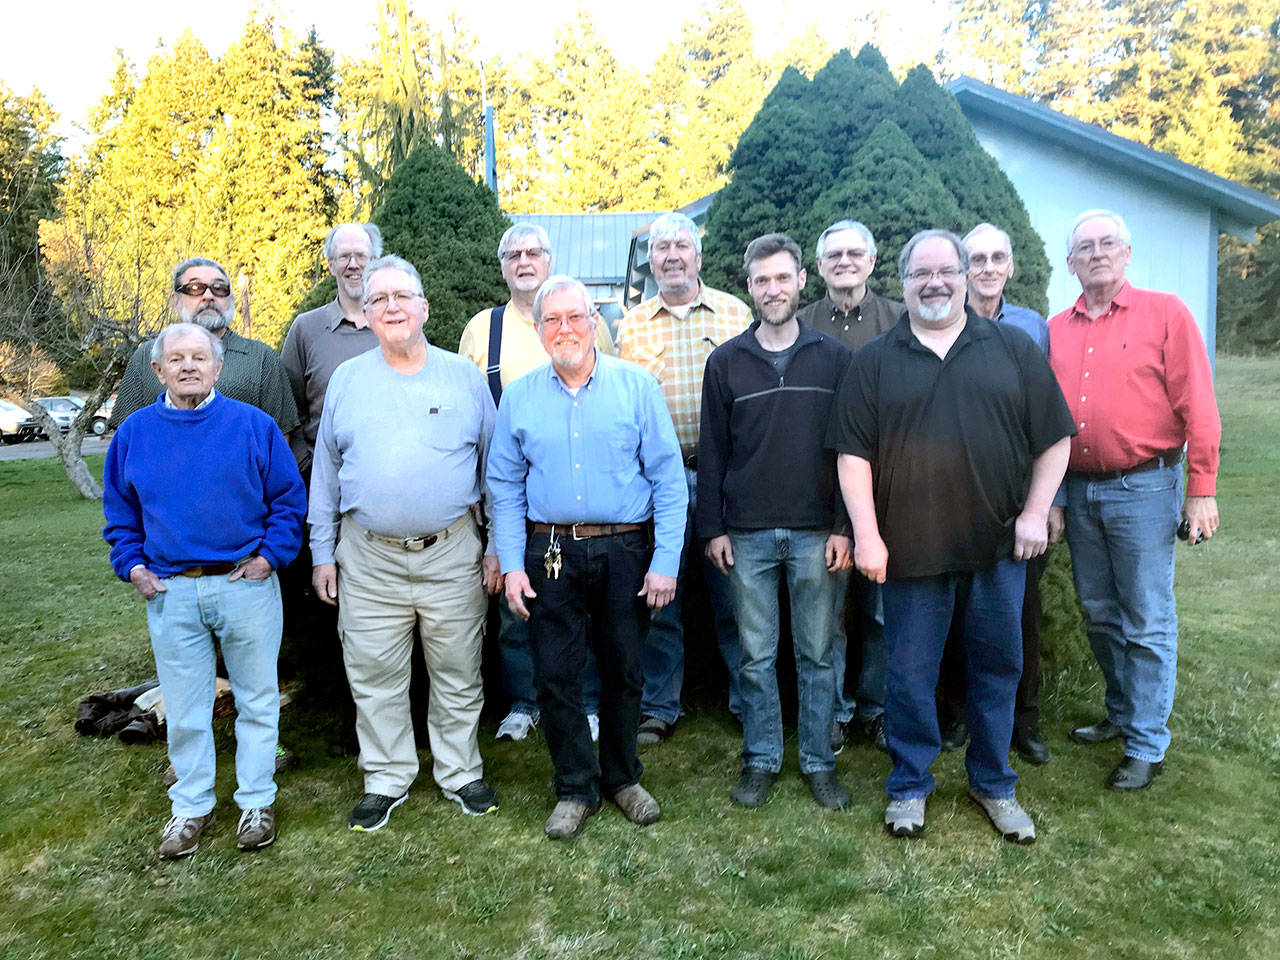 Performing Thursday will be Singers in the Rain, including, back row, from left, Michael Henson, David Schroeder, Steve Tilander, Rob Wamstad, Tom Rice, Ken Kiesel and Scott Rosekrans; front row, from left, Don White, Michael Cohoon, Jeff Johnson, Ryan Charrier and Tim Whicher. Harvey Crow is not pictured.